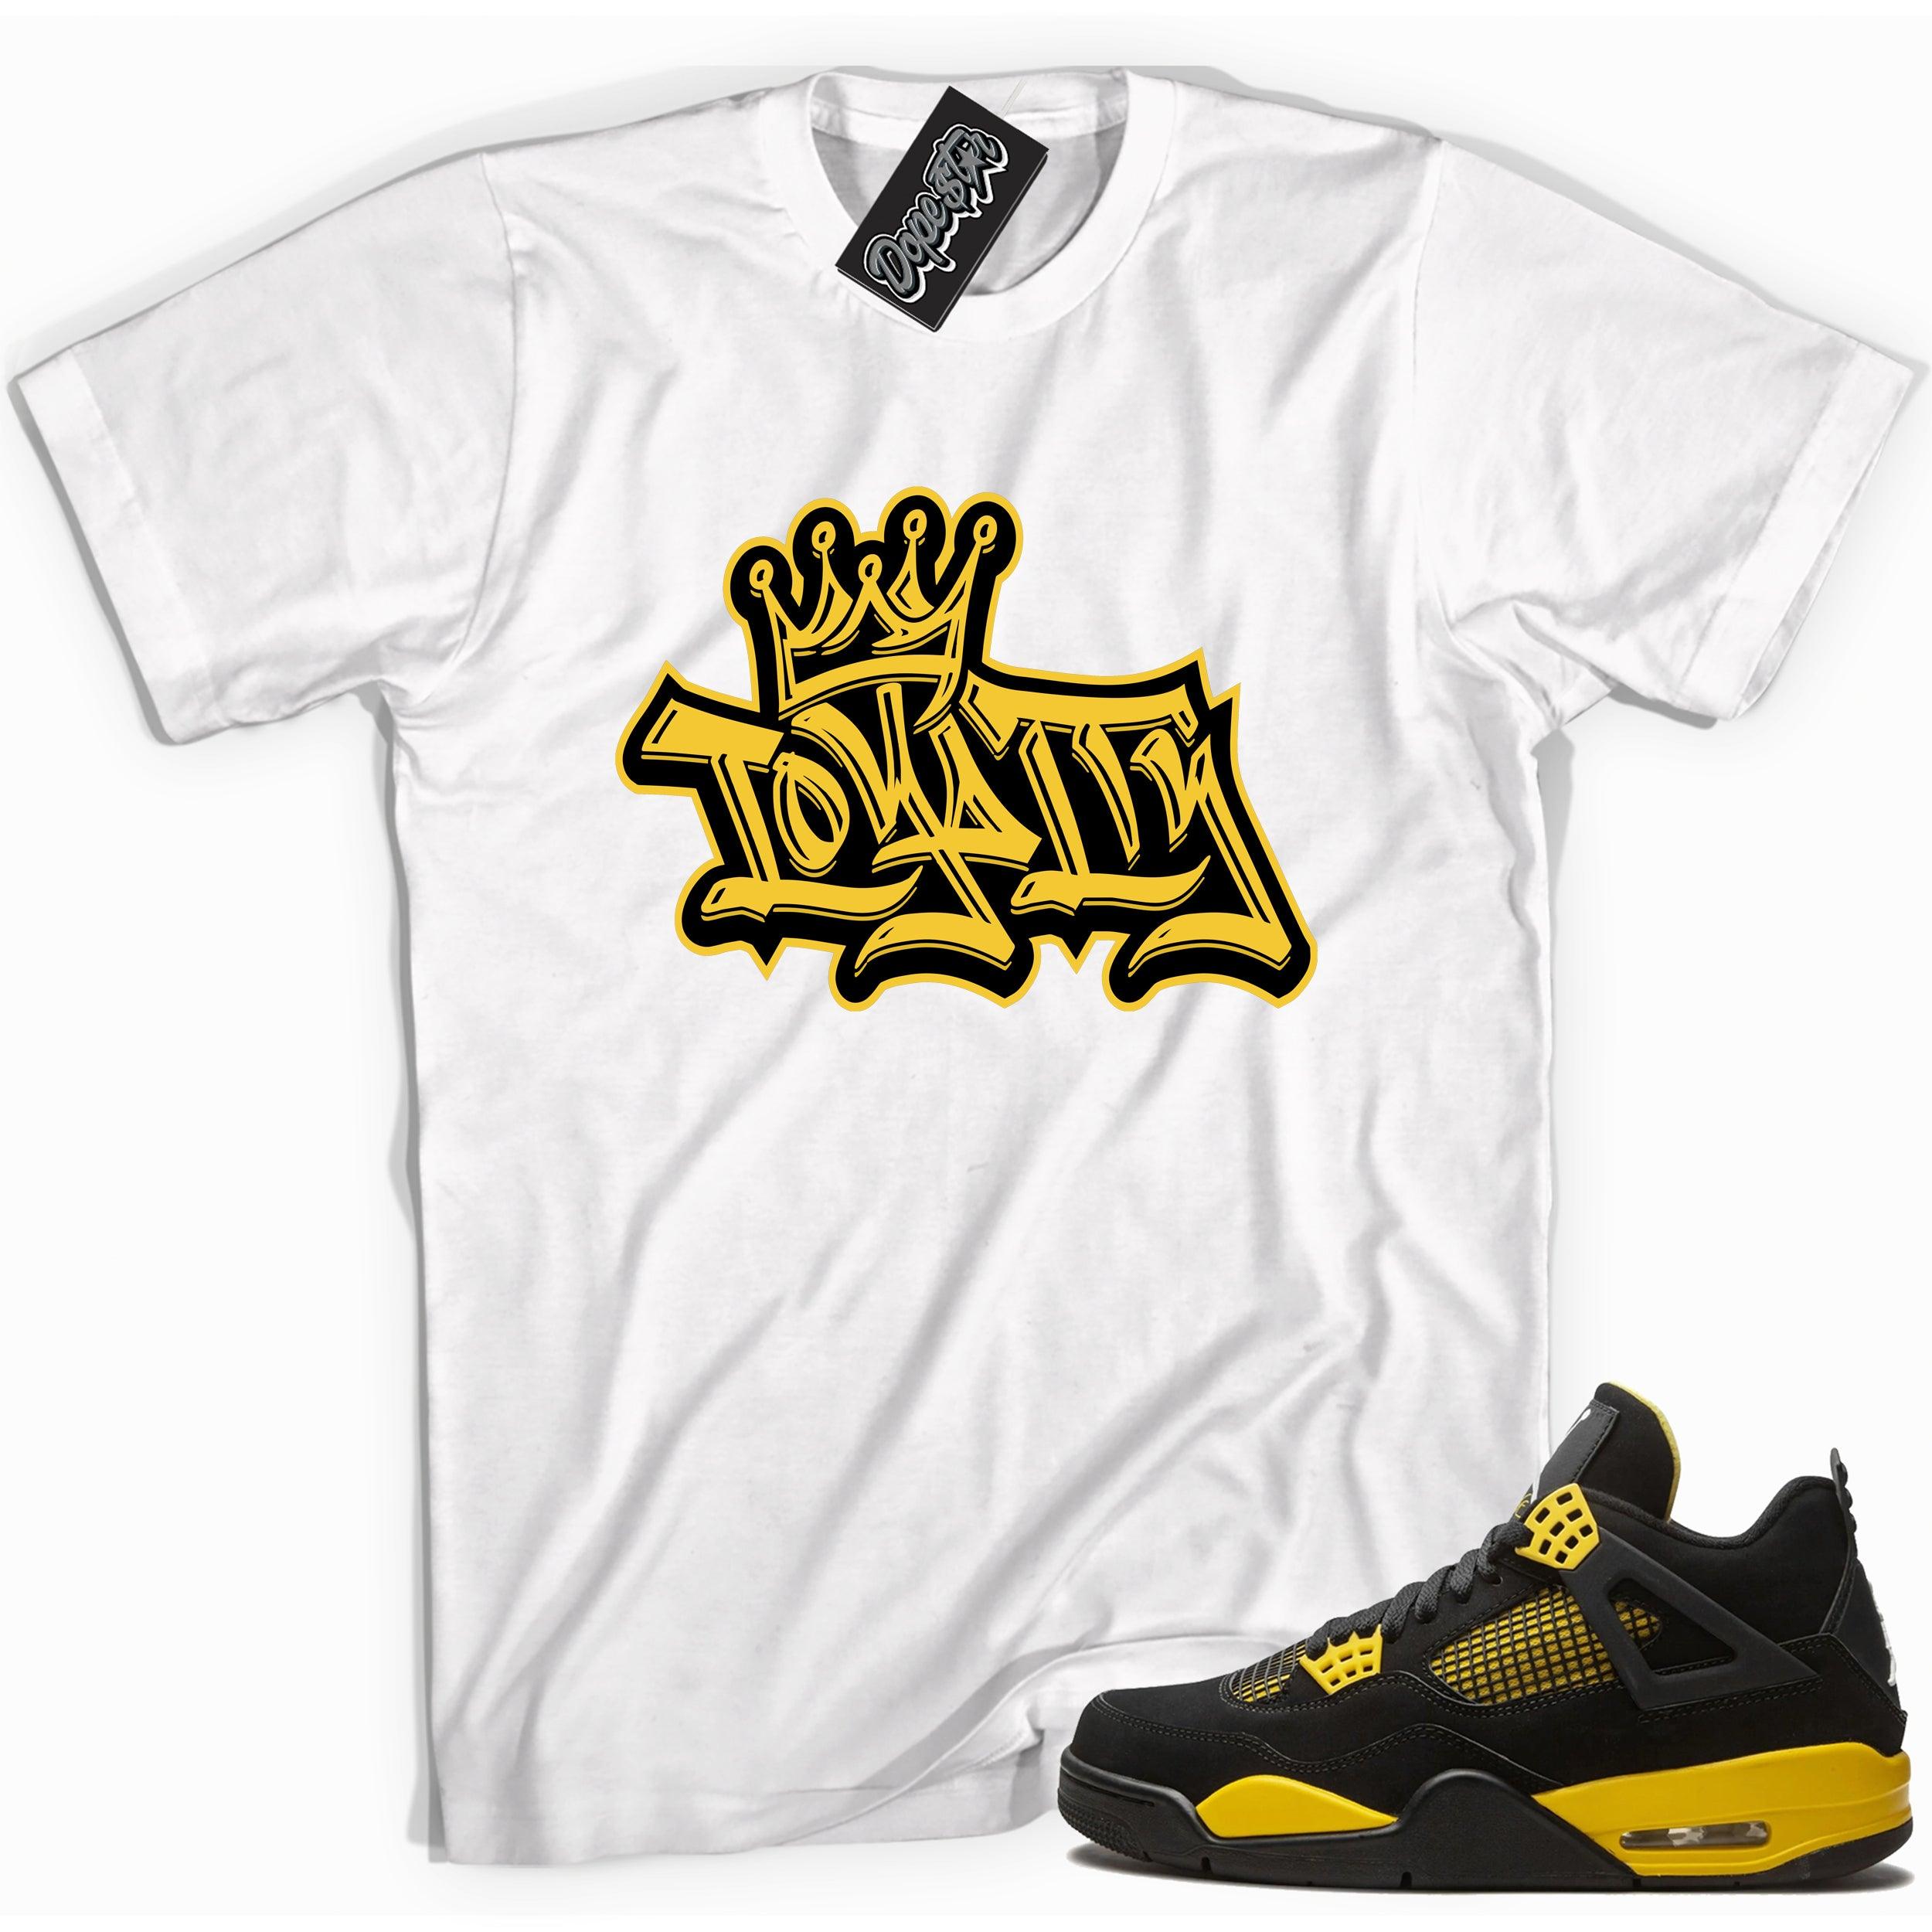 Cool white graphic tee with 'loyalty crown' print, that perfectly matches Air Jordan 4 Thunder sneakers